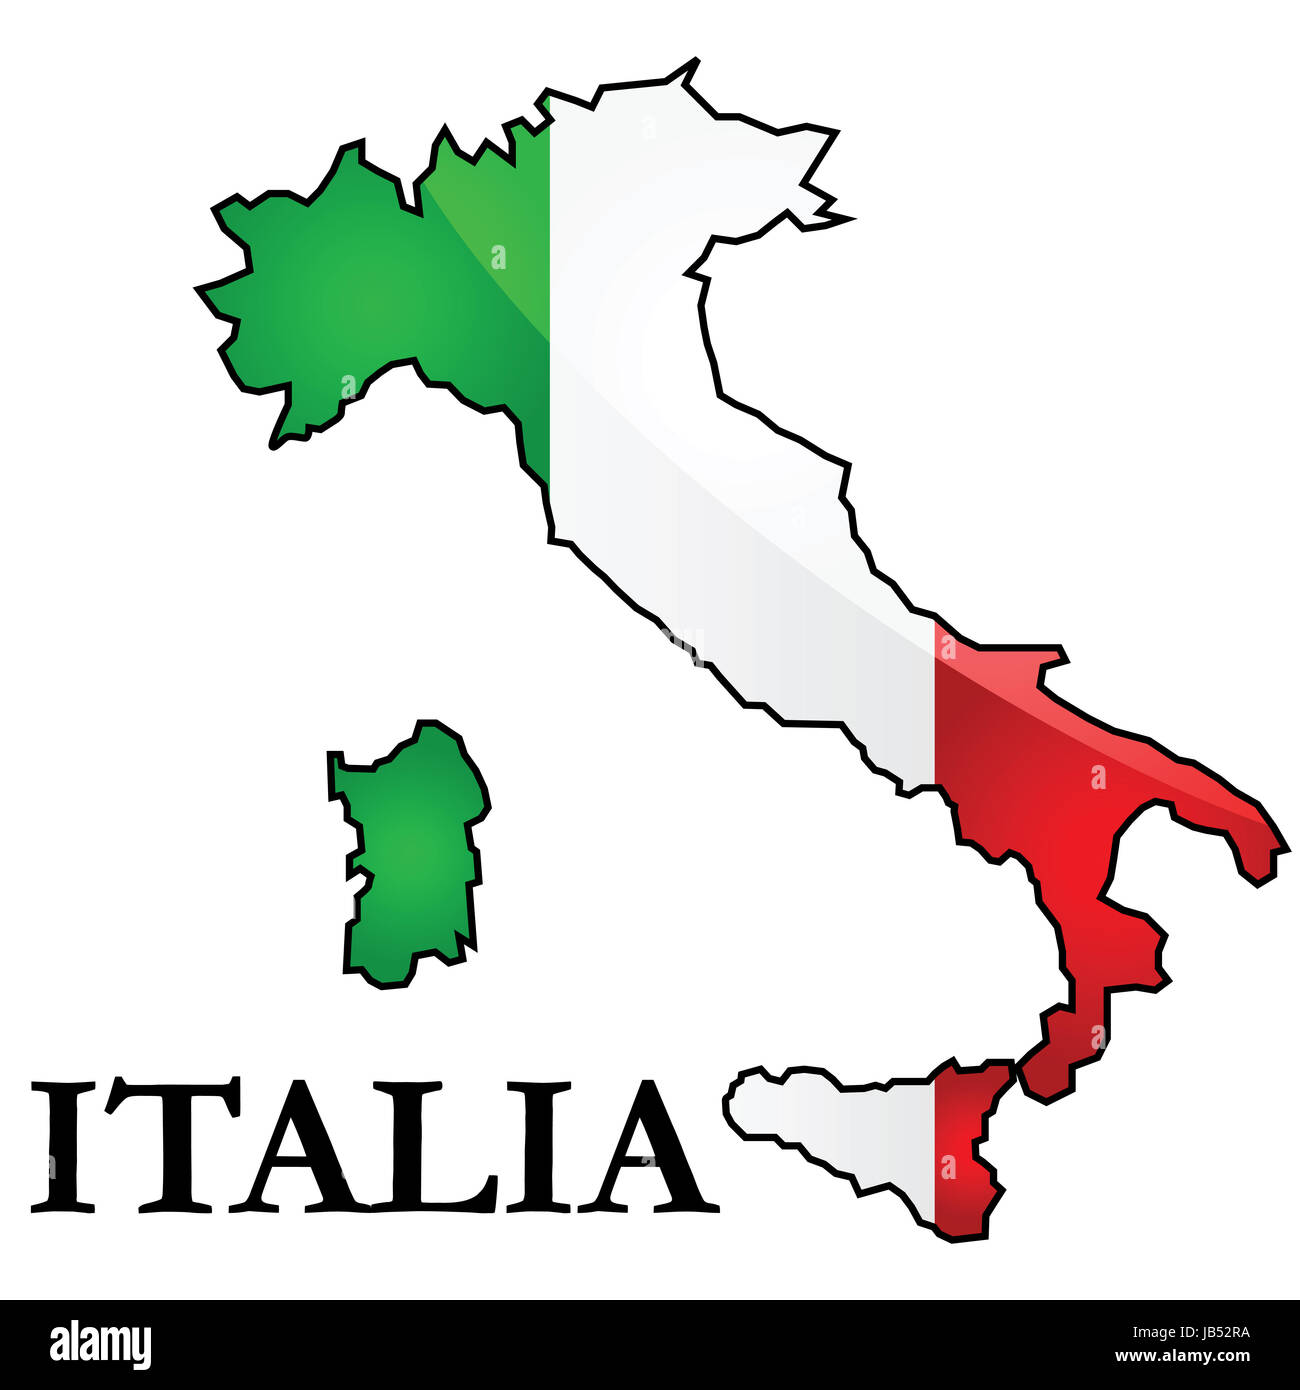 Glossy illustration showing the flag of Italy placed on top of the country's map. Stock Photo